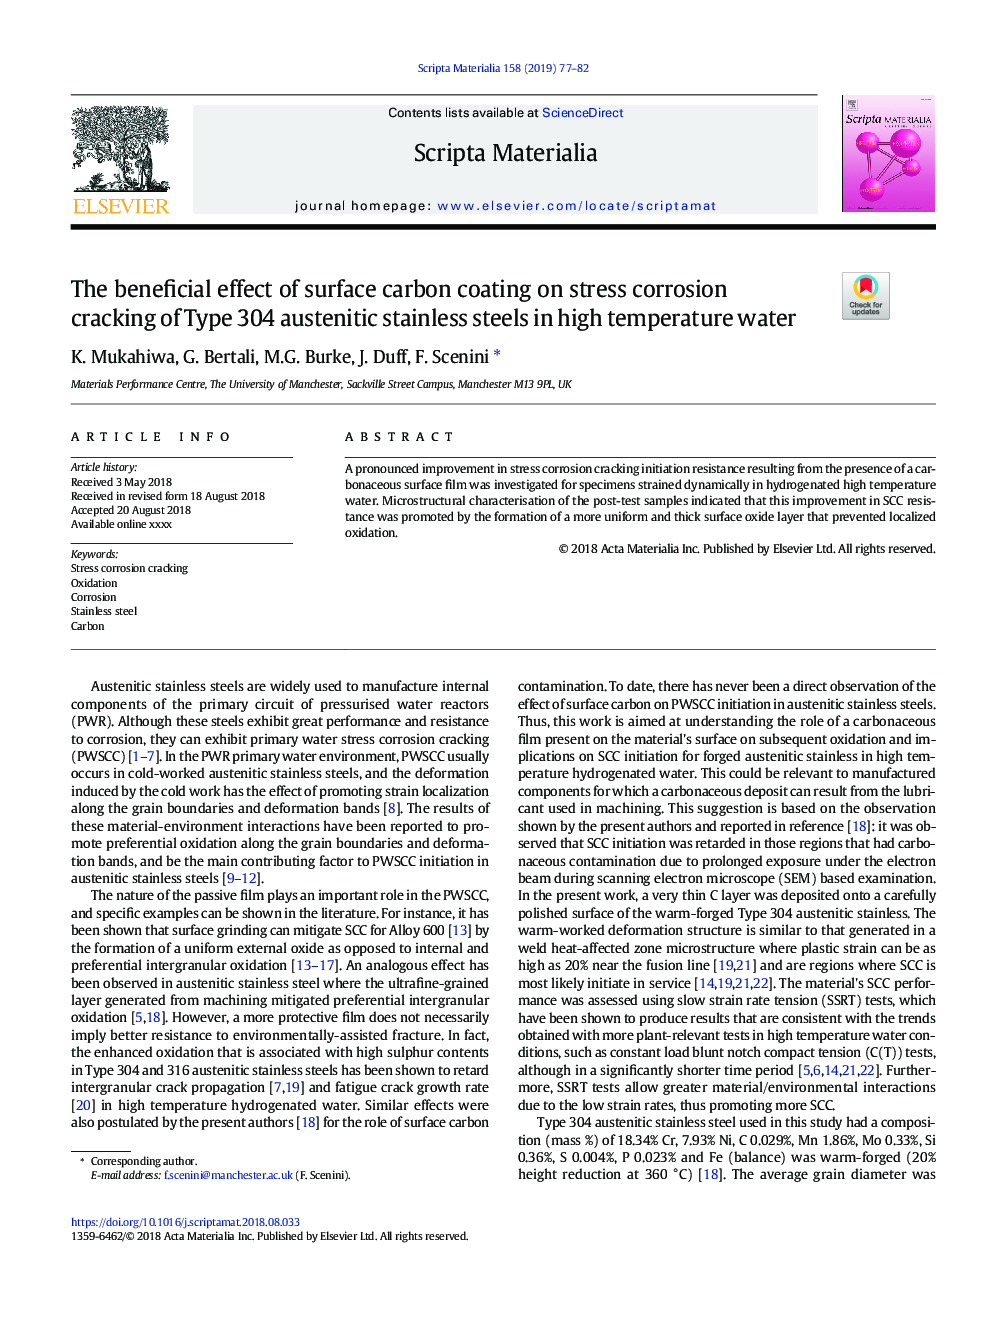 The beneficial effect of surface carbon coating on stress corrosion cracking of Type 304 austenitic stainless steels in high temperature water